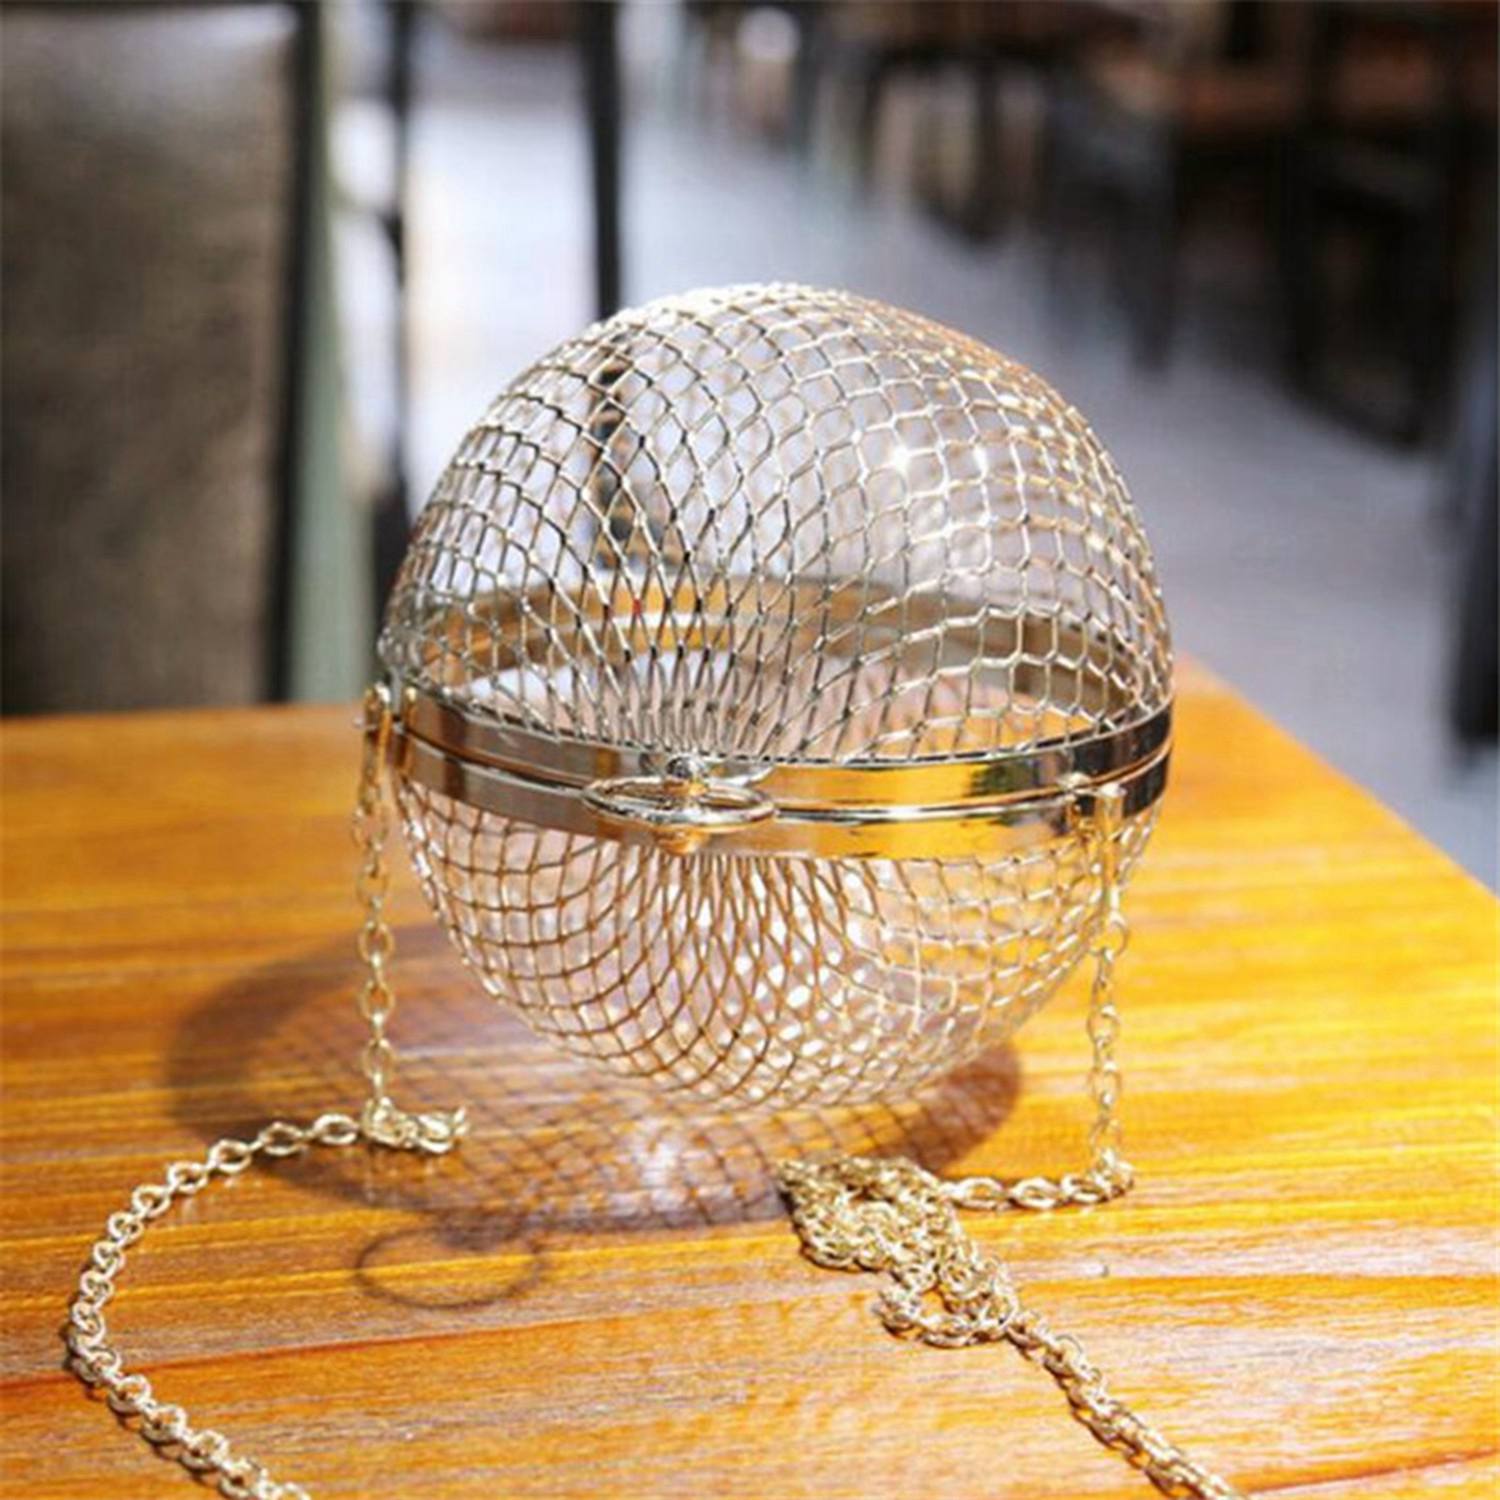 Hollow Metal Ball Shoulder Bag Cages Women Round Clutch Bag Evening Ladies Luxury Wedding Party Bags Cross Body Purse - ebowsos